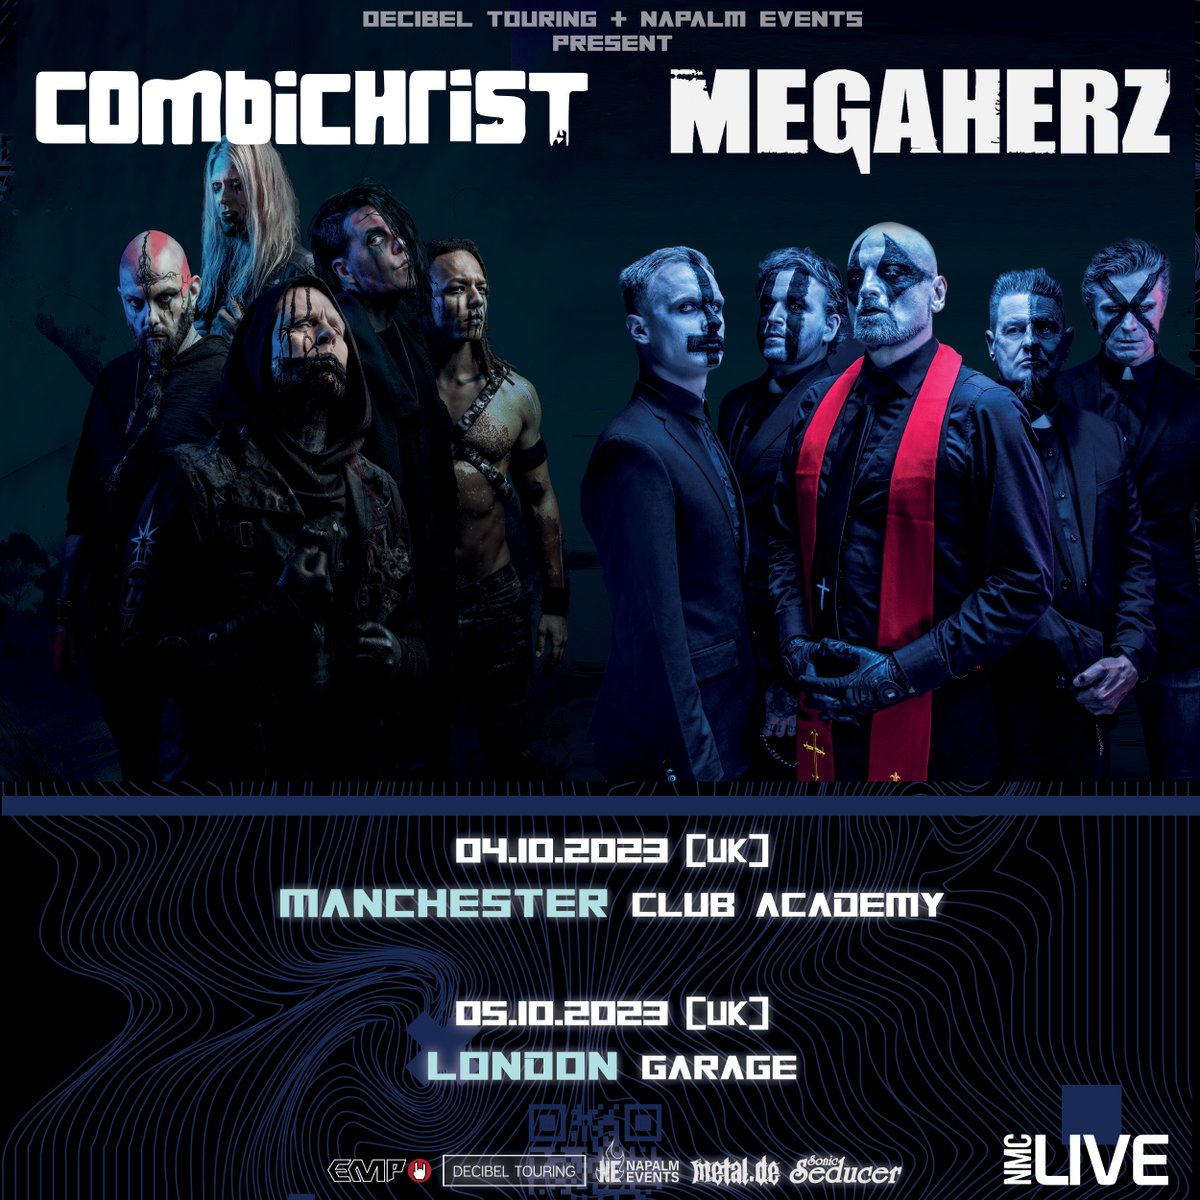 .@combichristarmy are back in the UK this October with Megaherz! 🤘 Tickets on sale this Friday, 2nd June, at 10am!